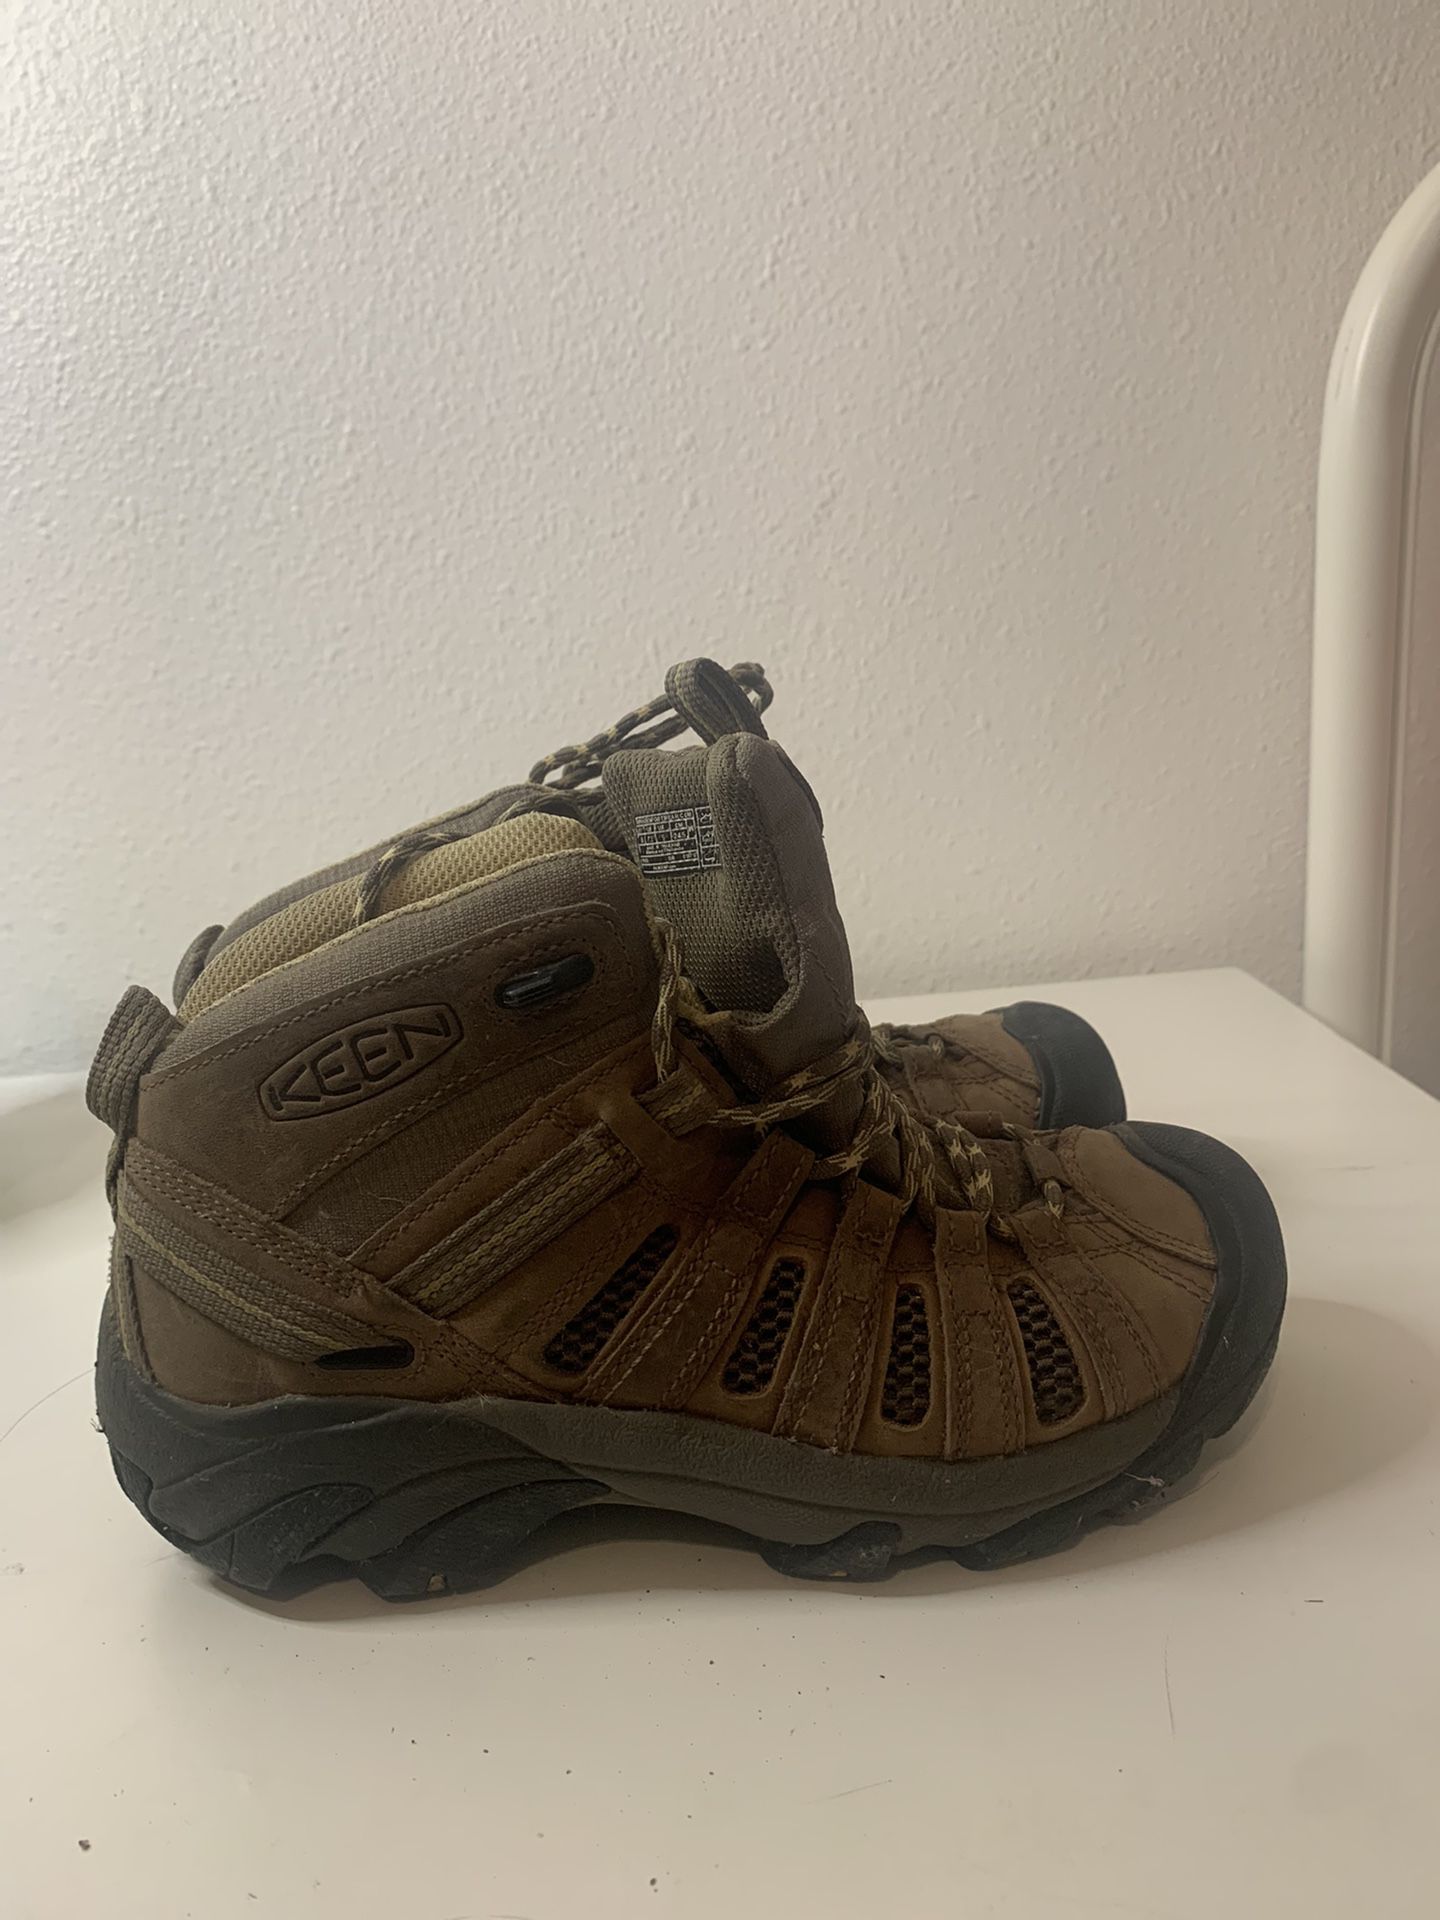 KEEN hiking Boots Womens Size 7.5